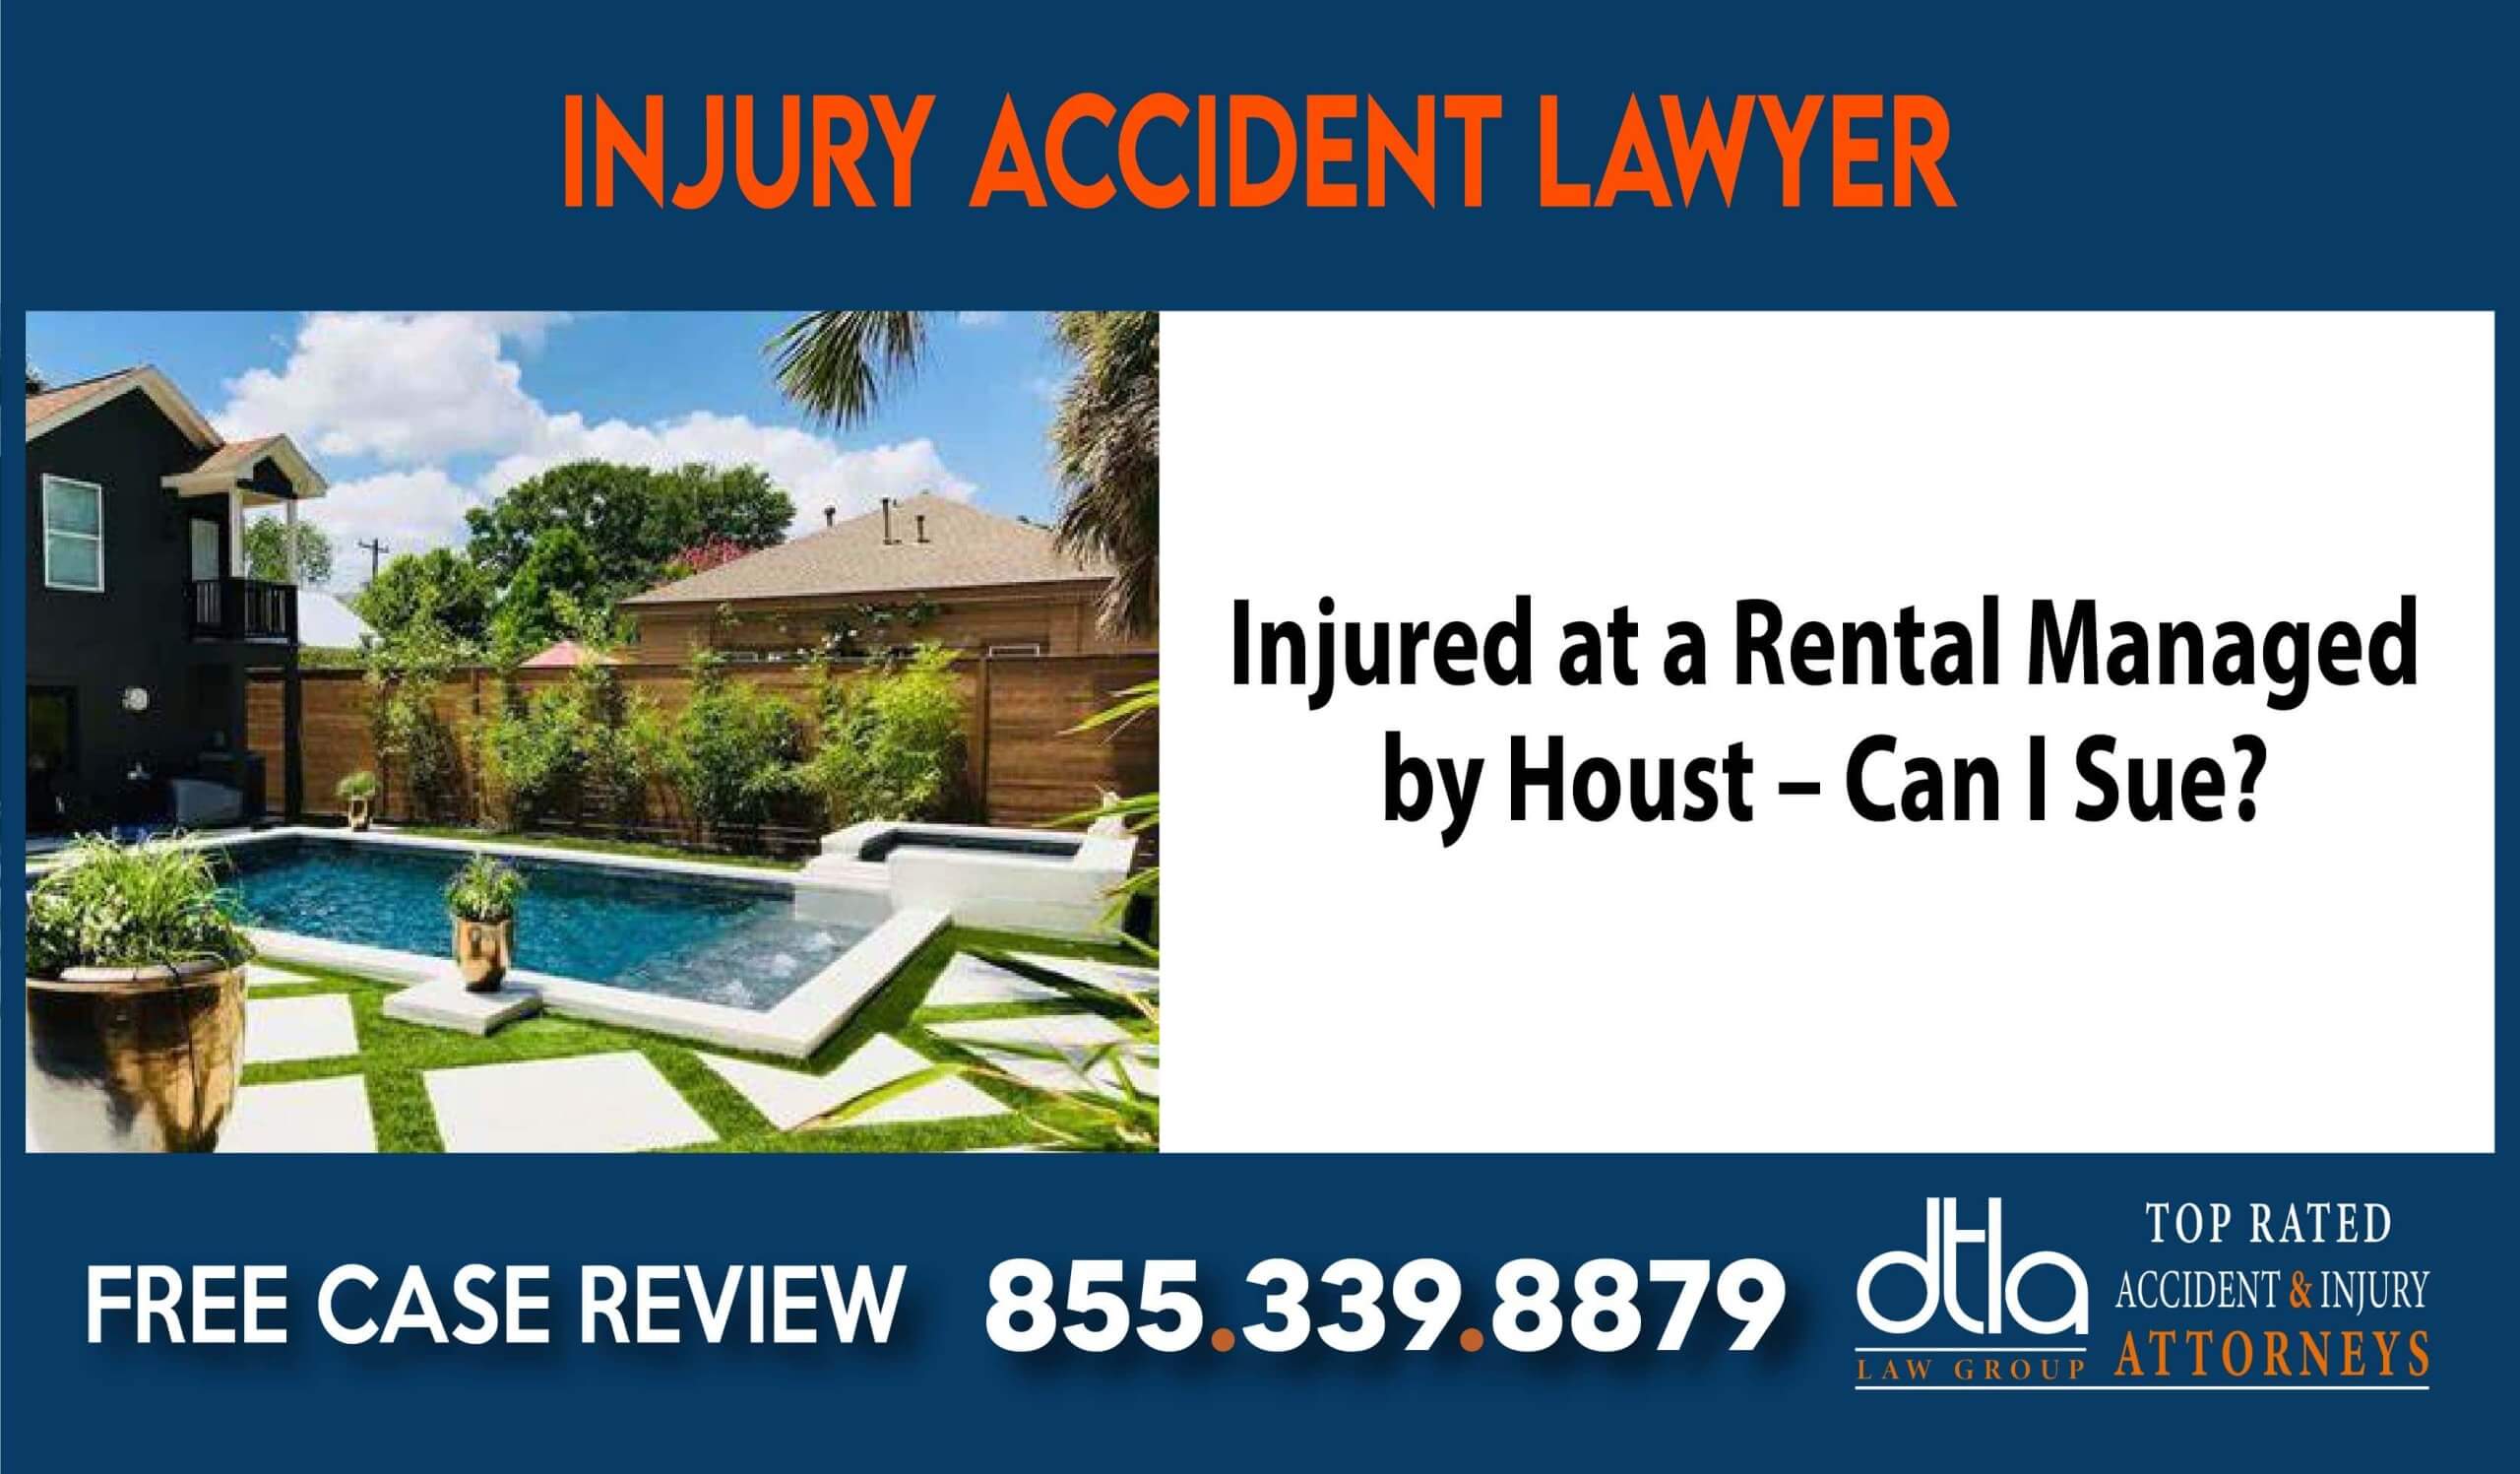 Injured at a Rental Managed by Houst Can I Sue lawyer attorney compensation incident liability